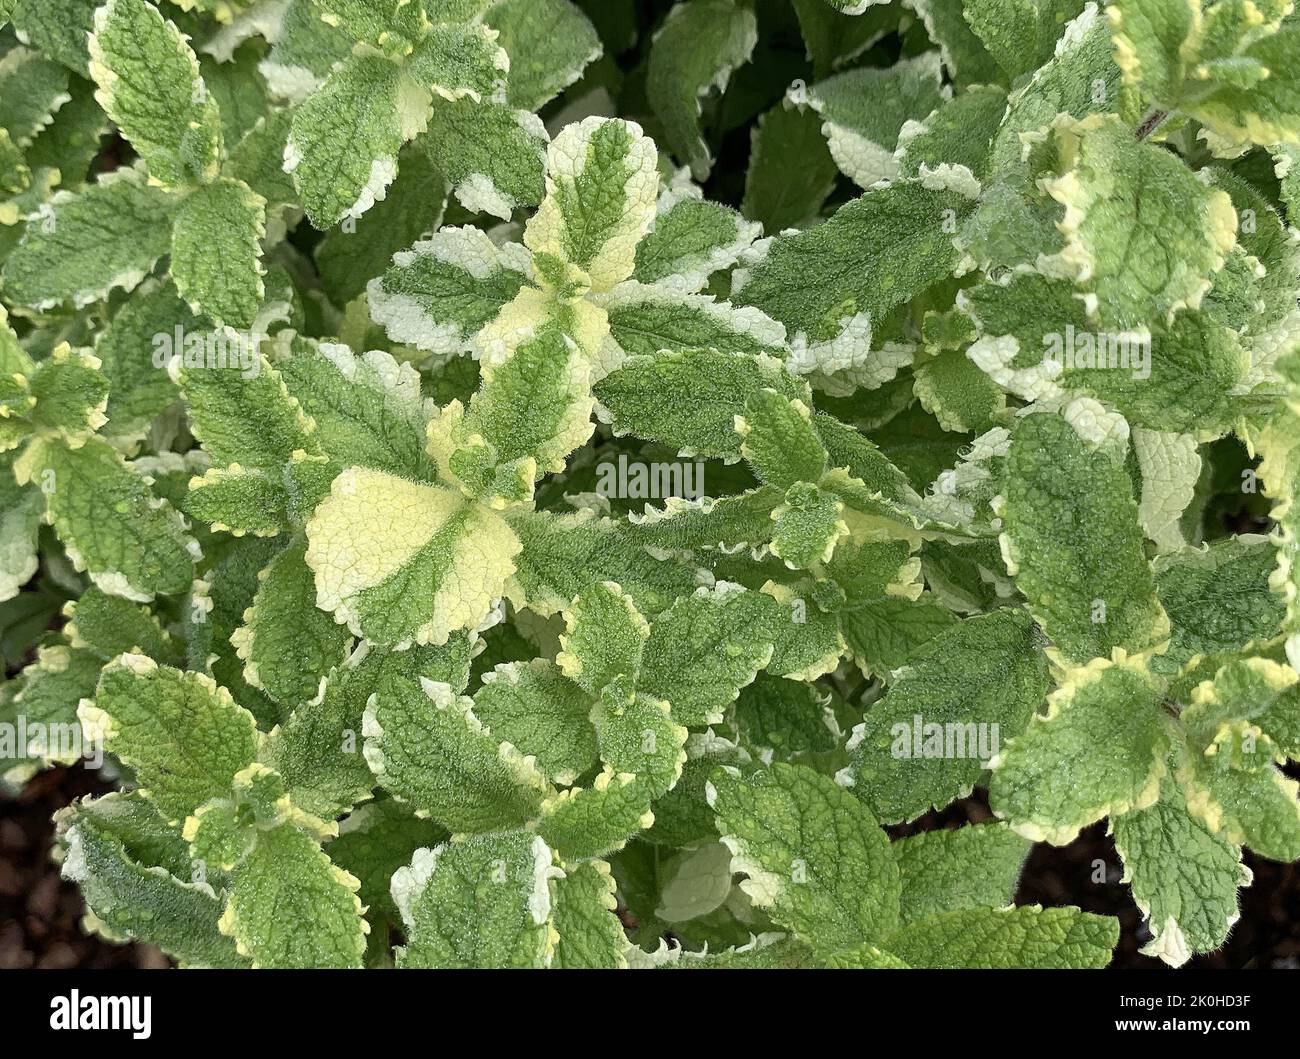 Close up of the variegated leaves of pineapple mint Mentha suaveolens Variegata plant seen in the garden in the UK in late summer. Stock Photo